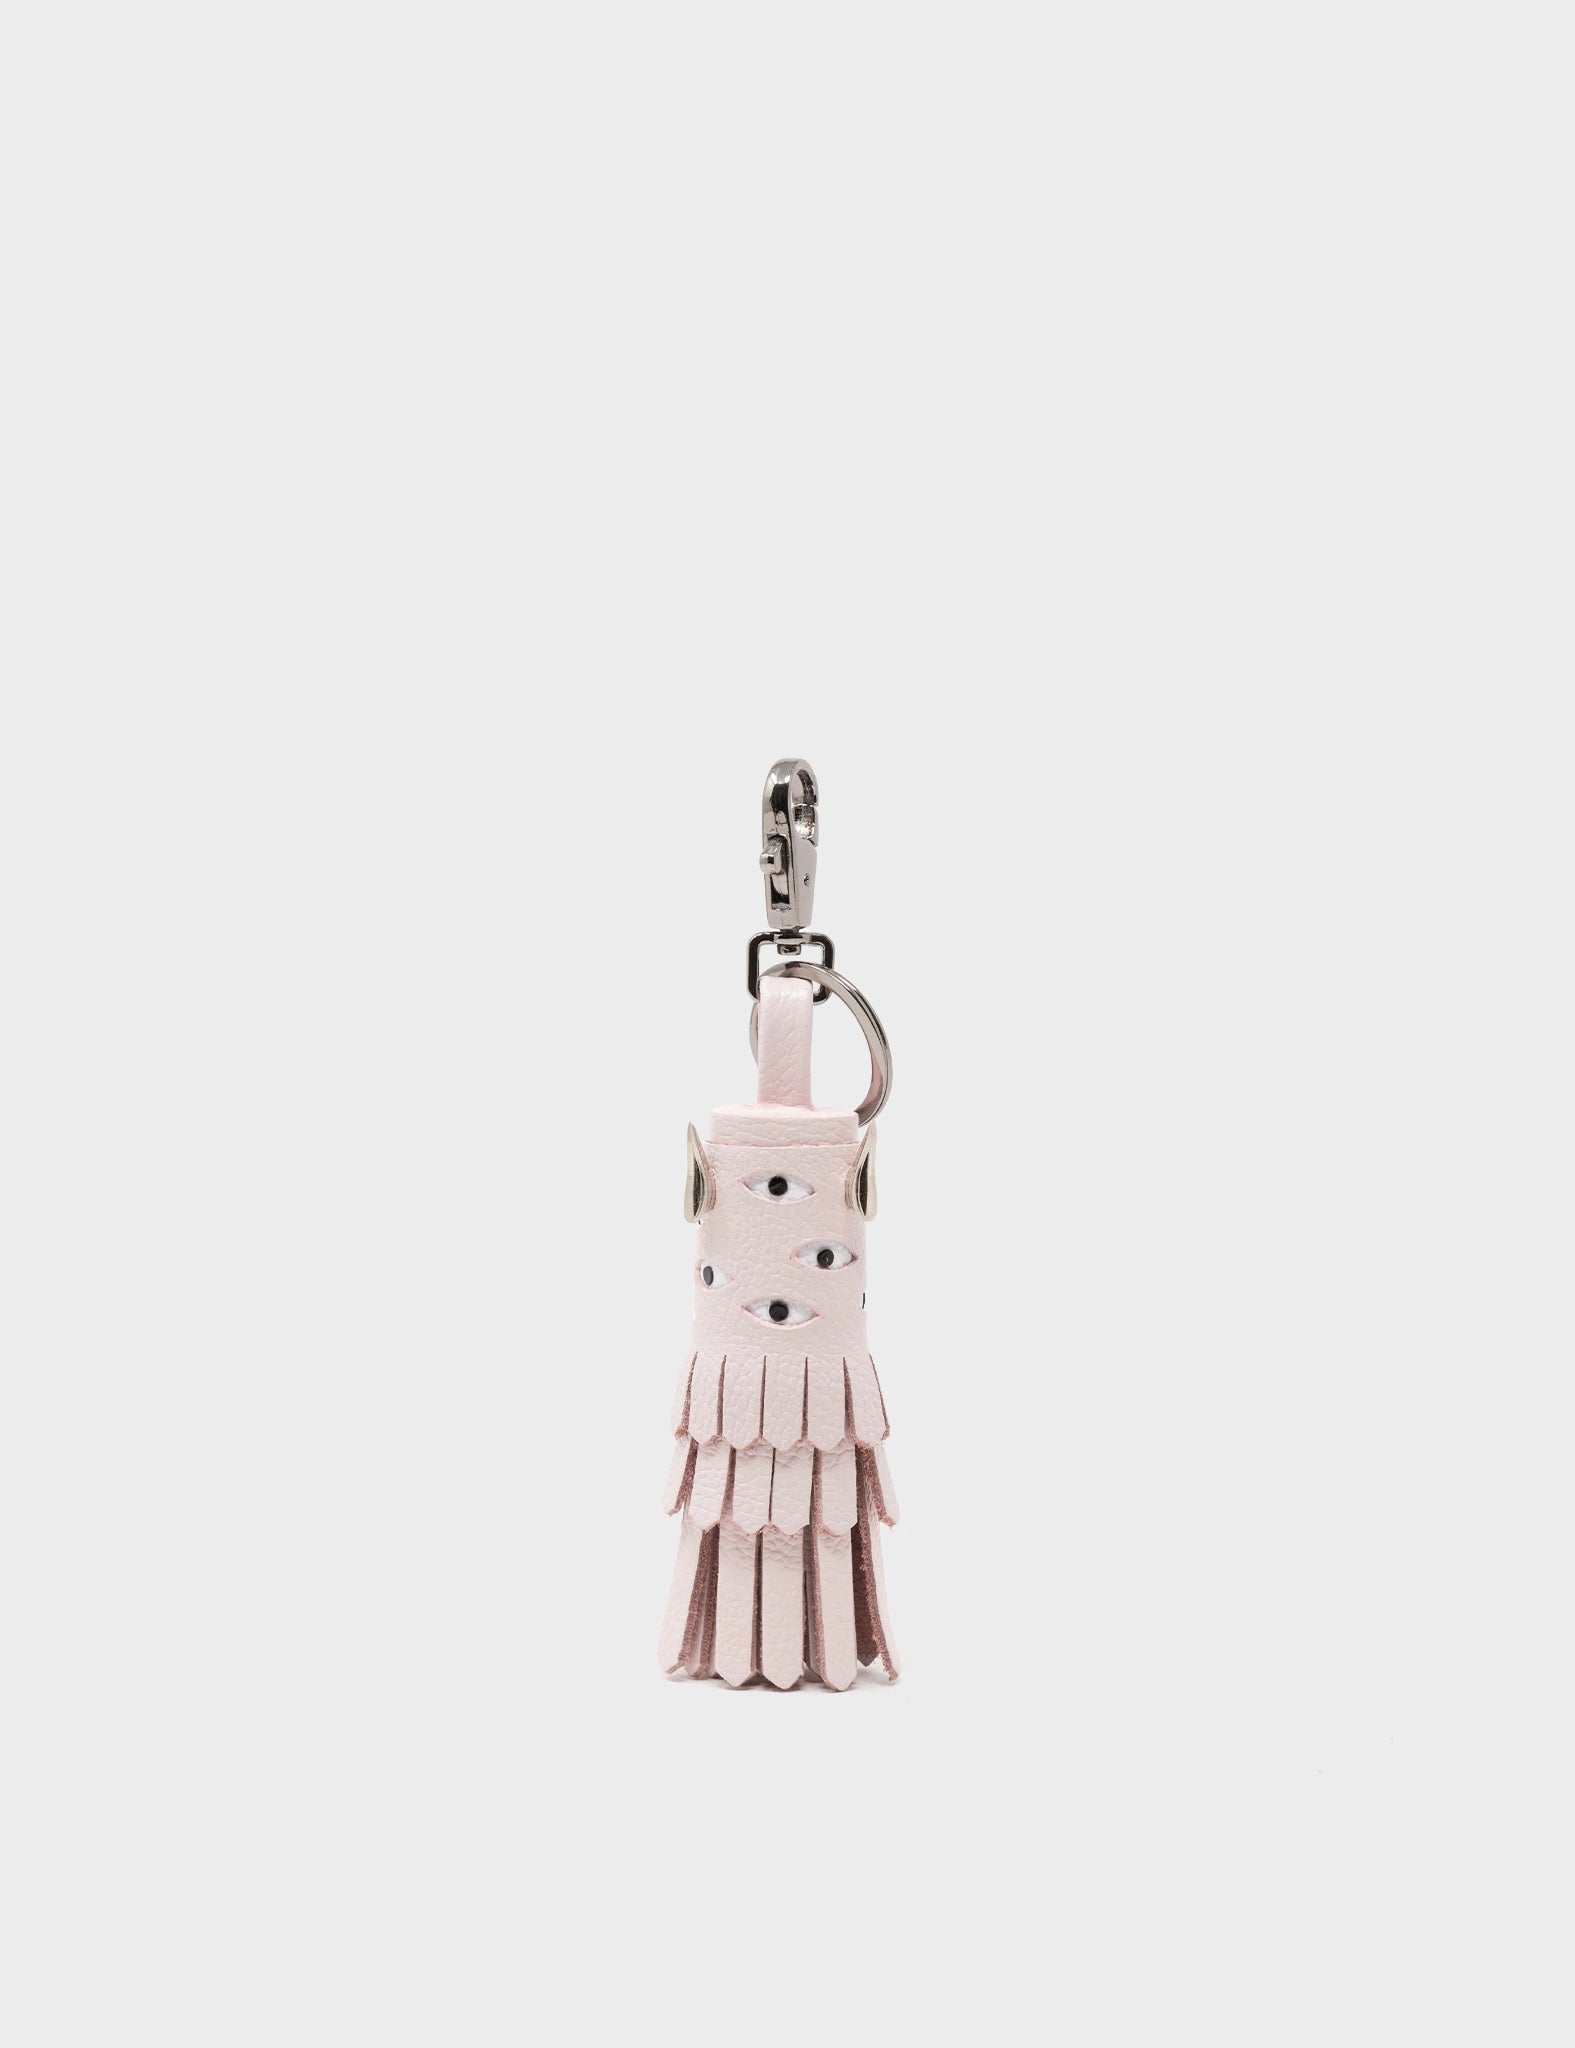 Oliver The Ox Charm - Powder Pink Leather Keychain